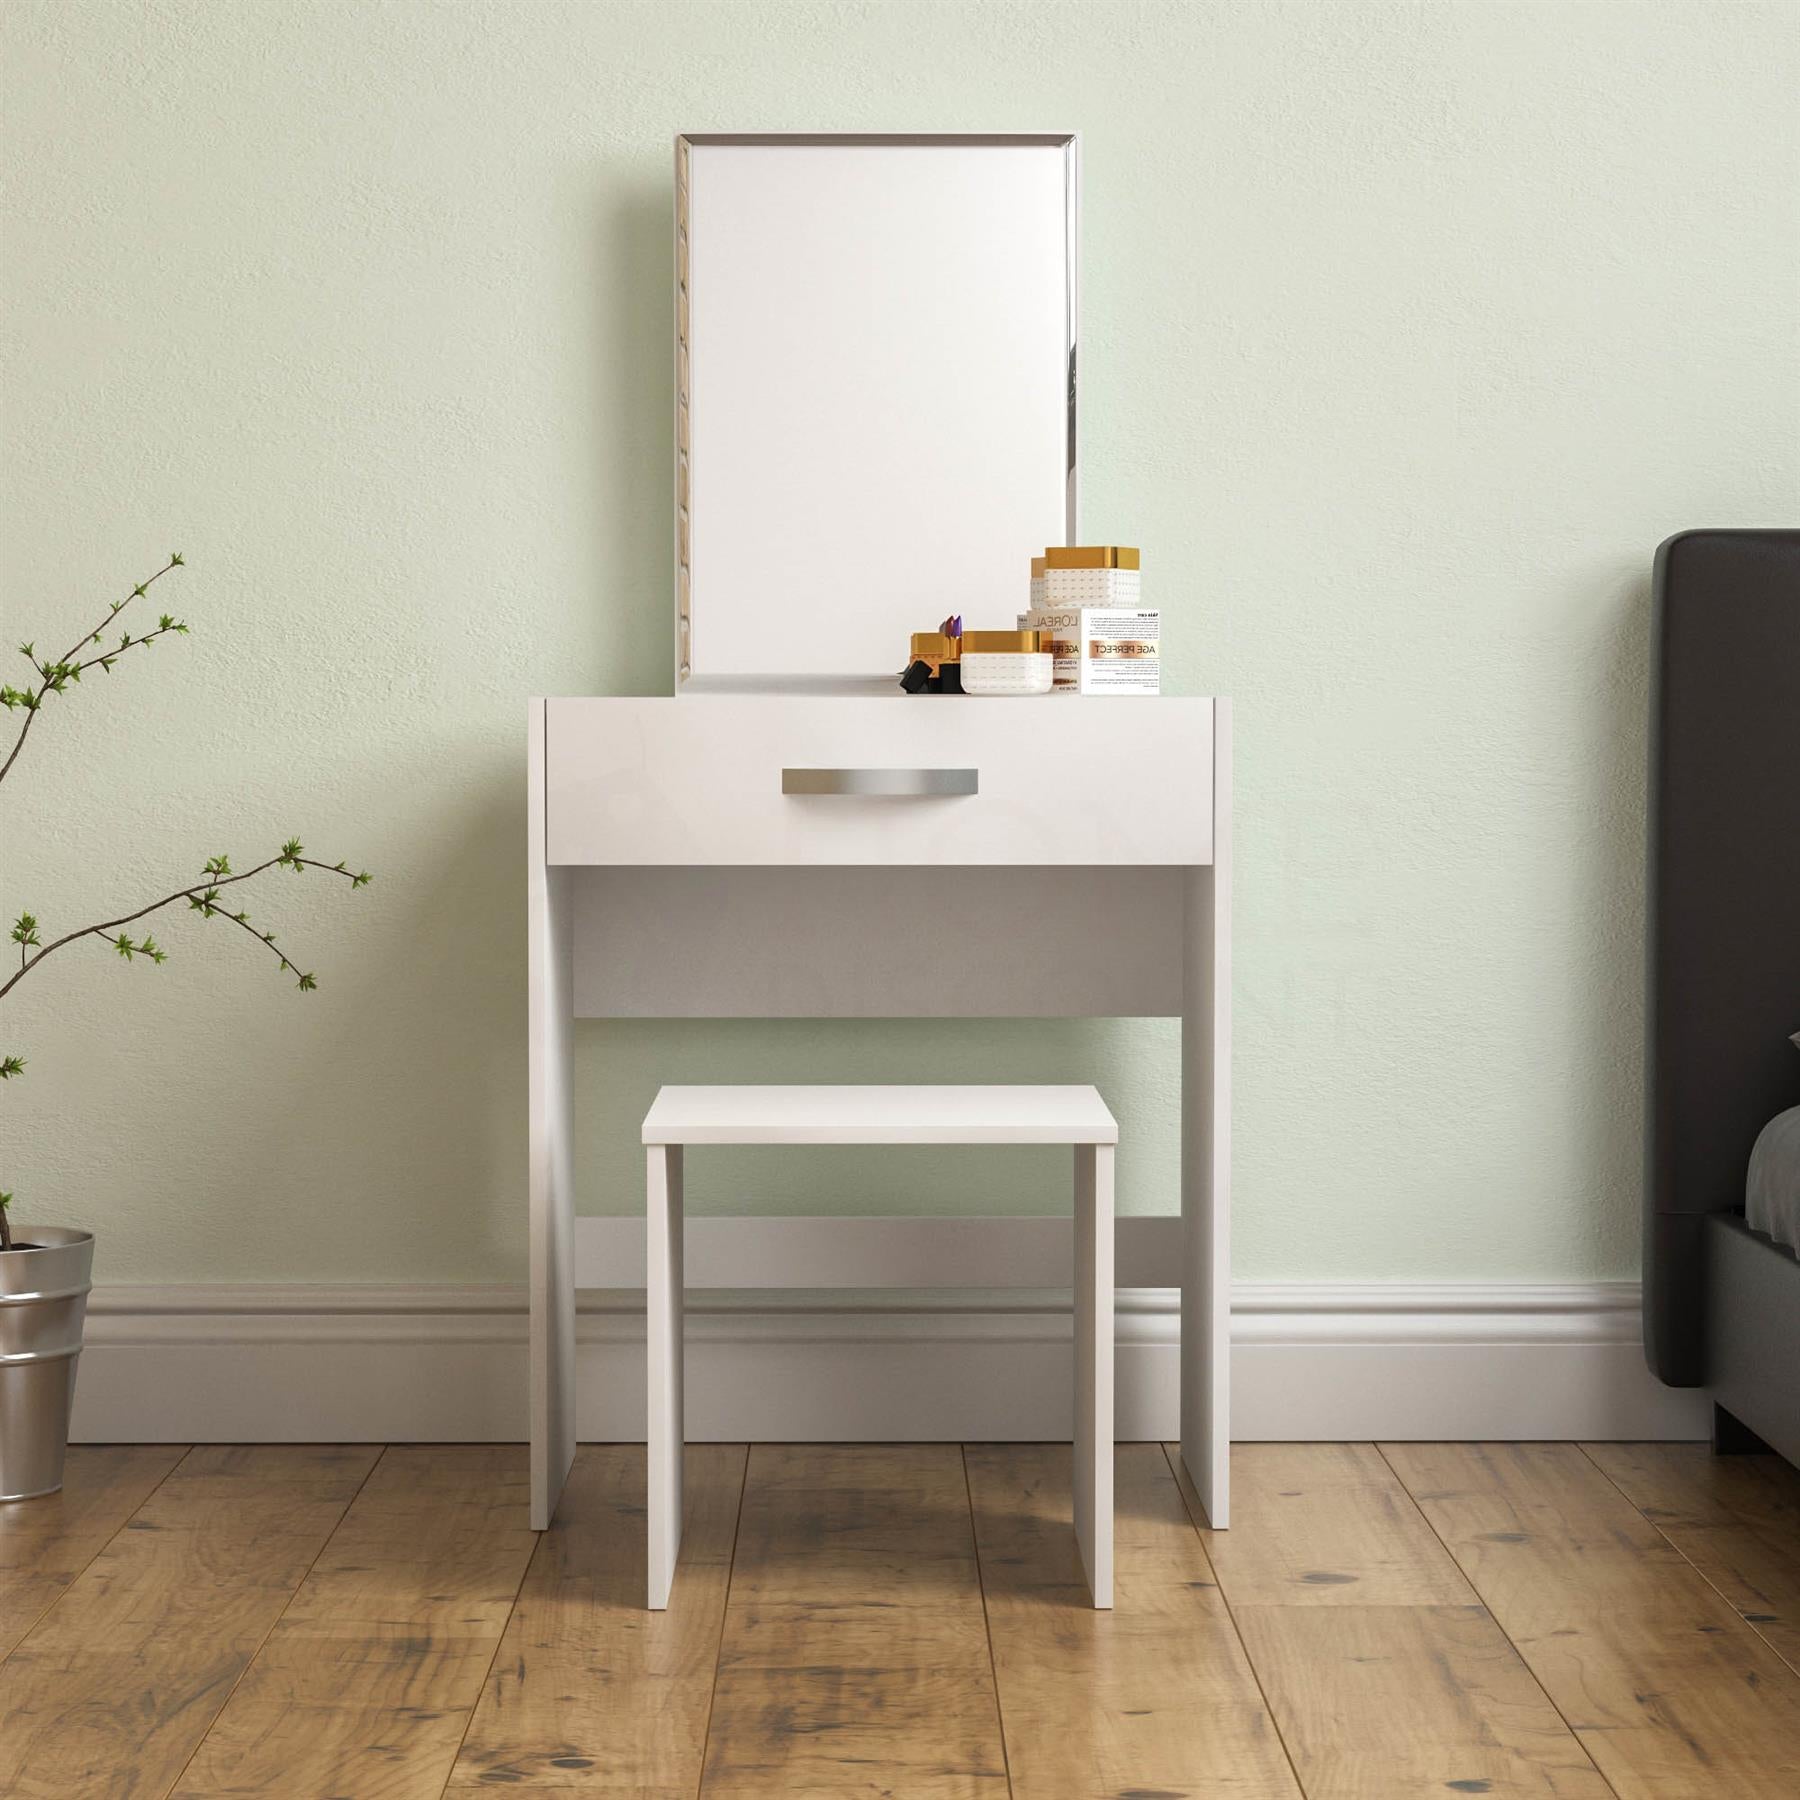 Top dressing table mirror ideas for modern homes